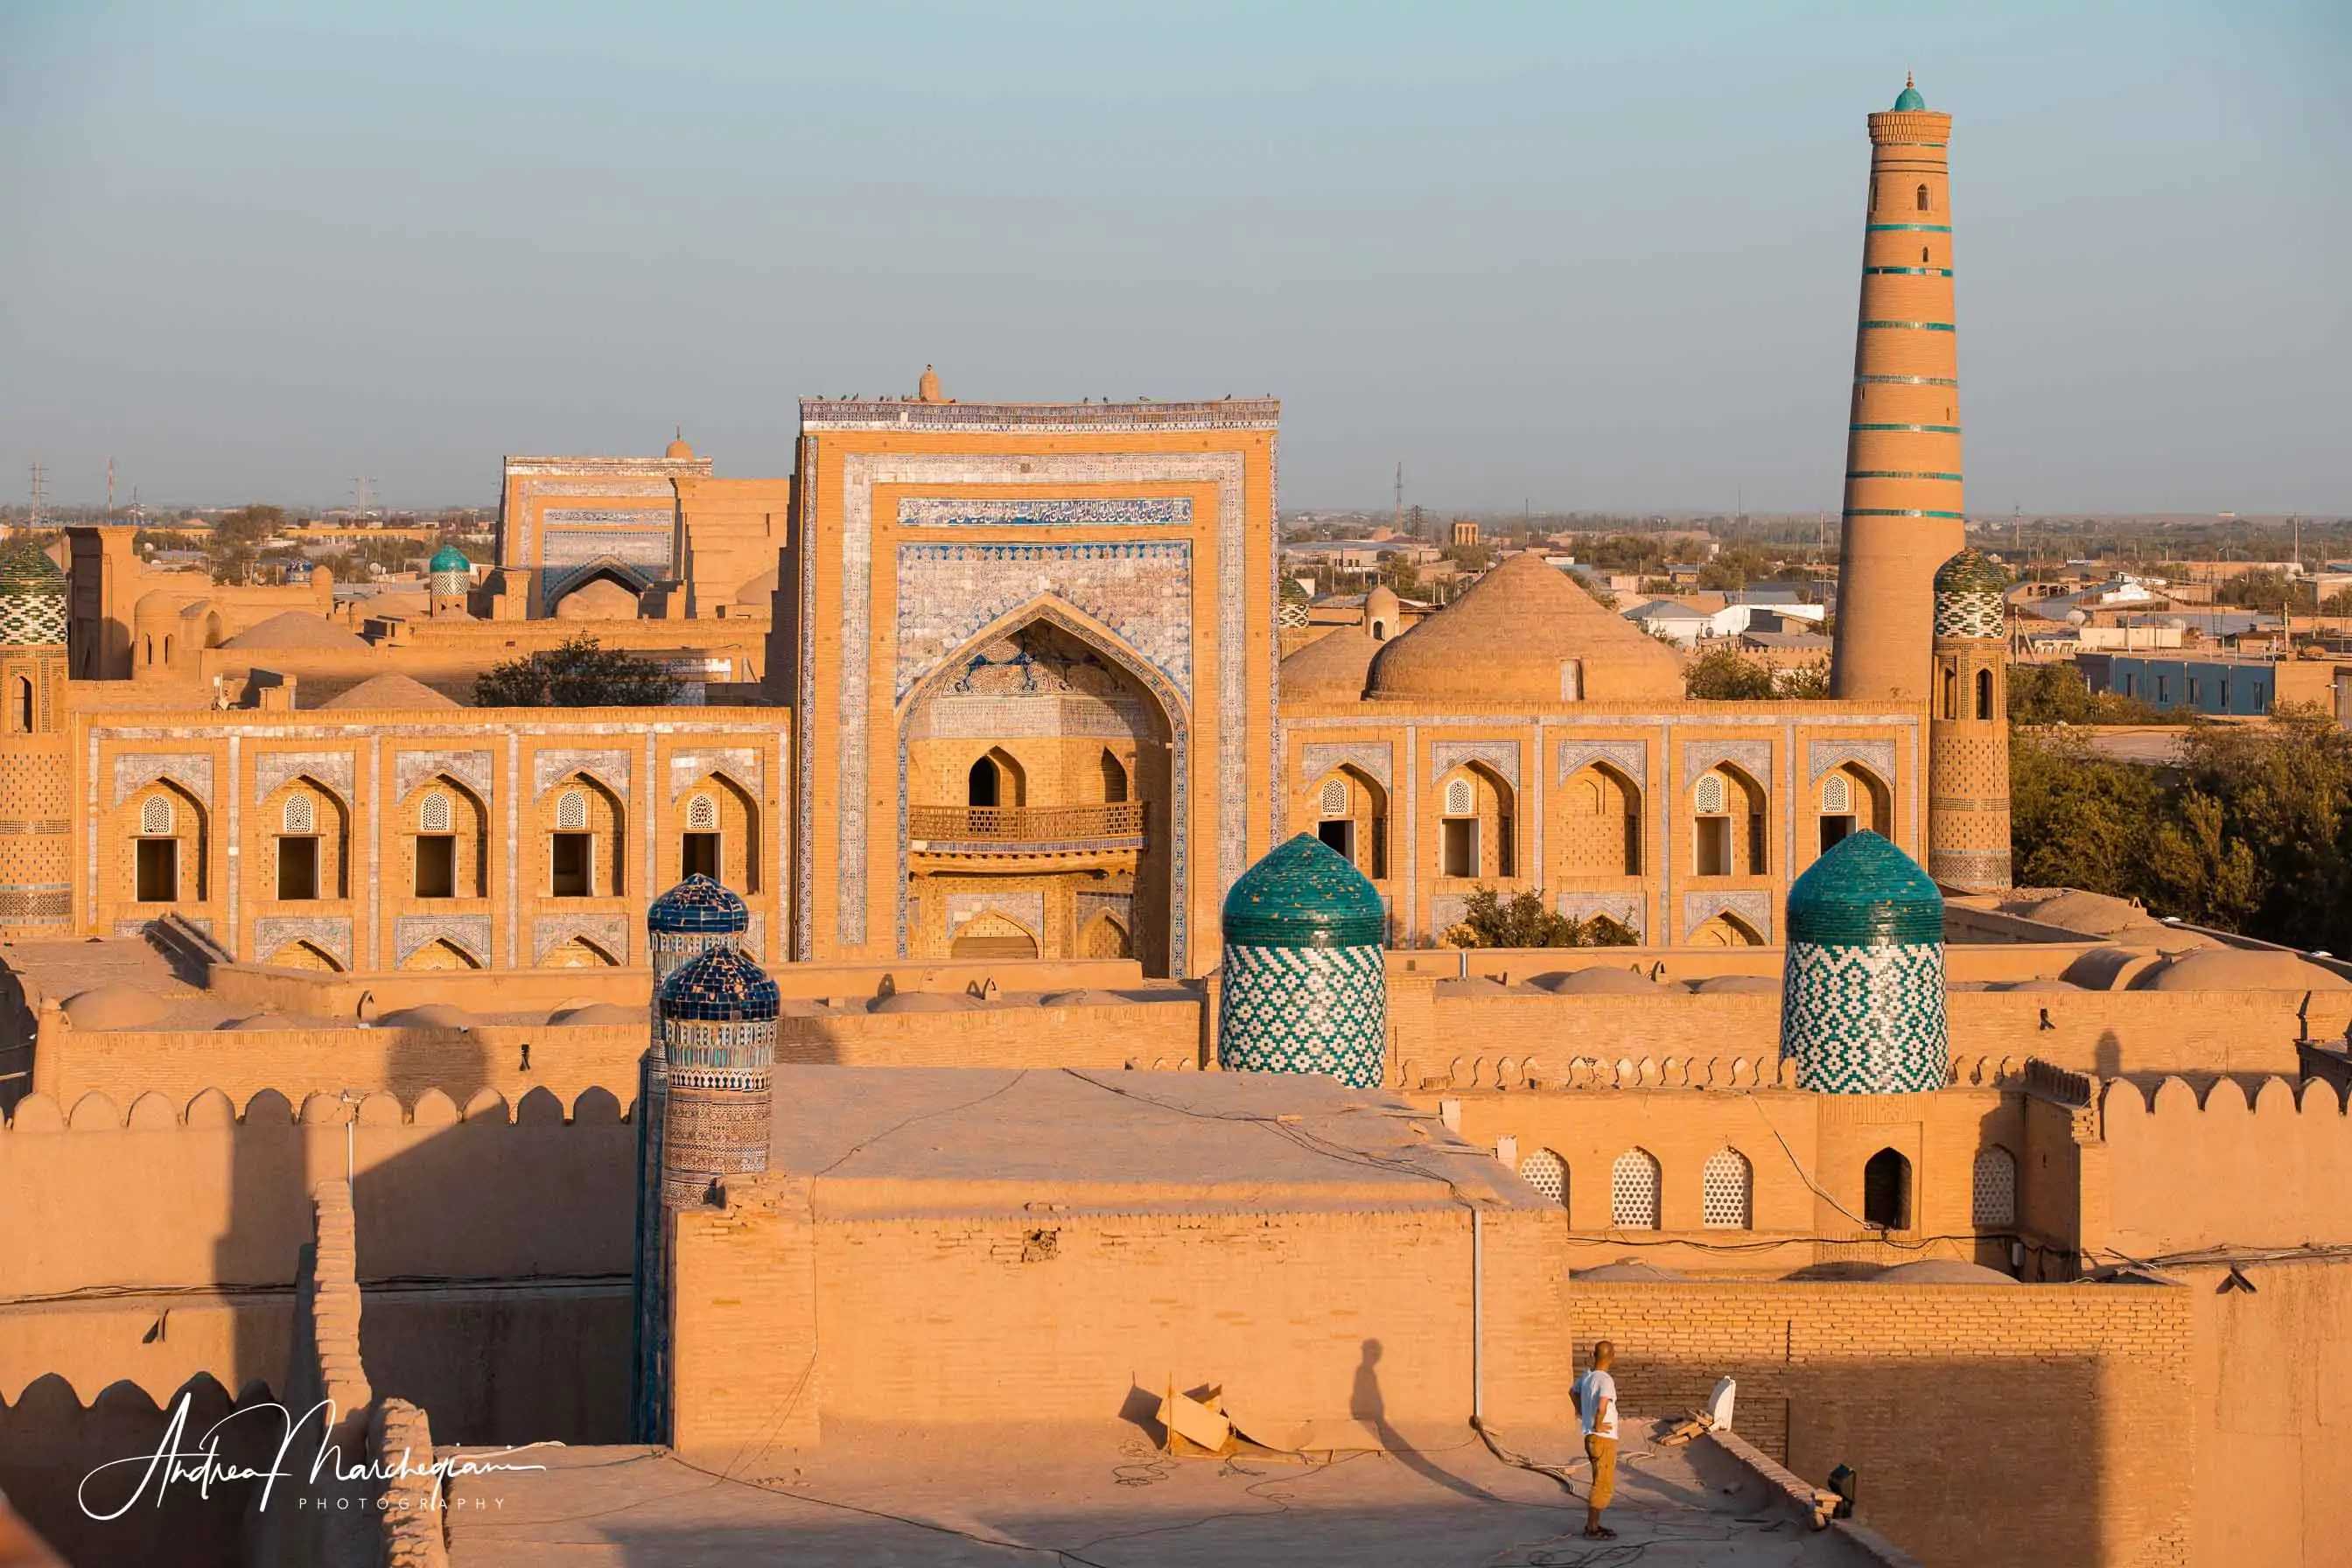 View of Khiva from the western walls